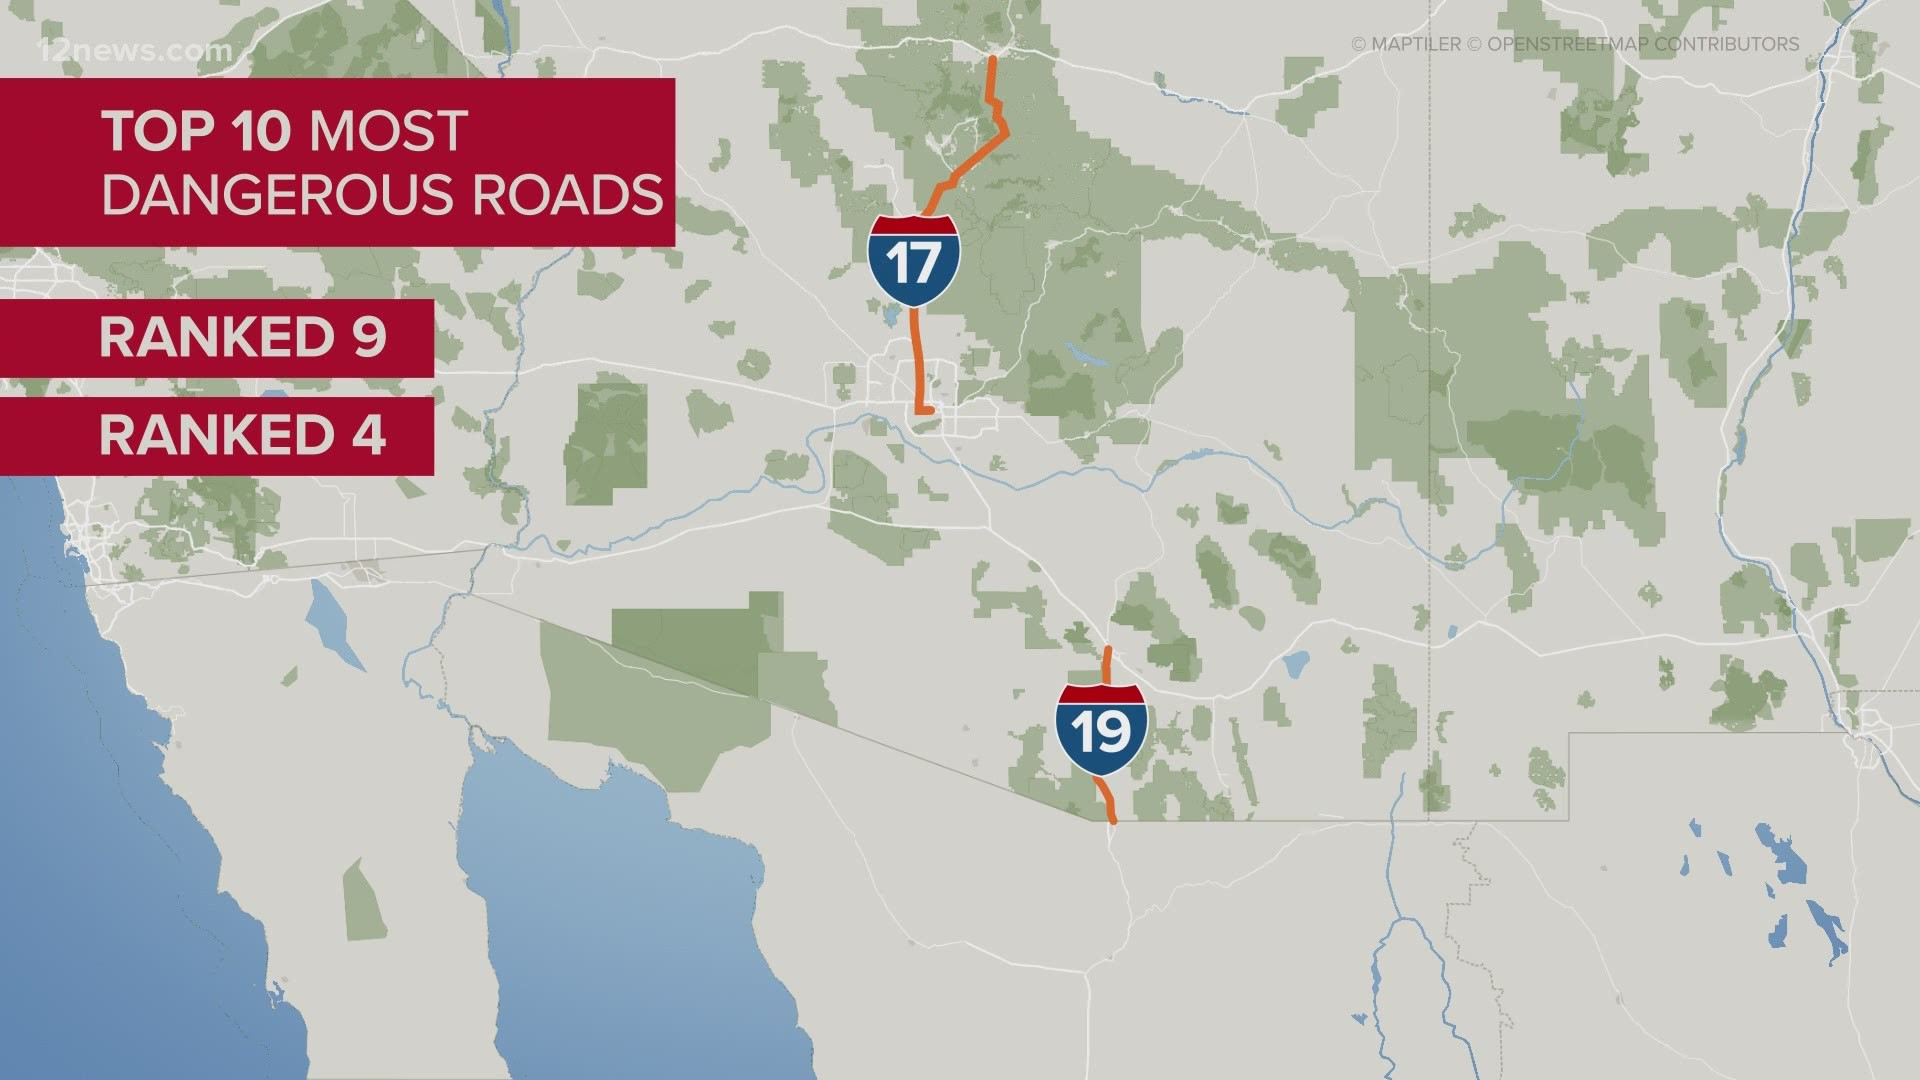 Two Arizona roads made the top 10. I-19 between Tucson and Nogales came in at number ninth. I-17 from Phoenix to Flagstaff ranked fourth.